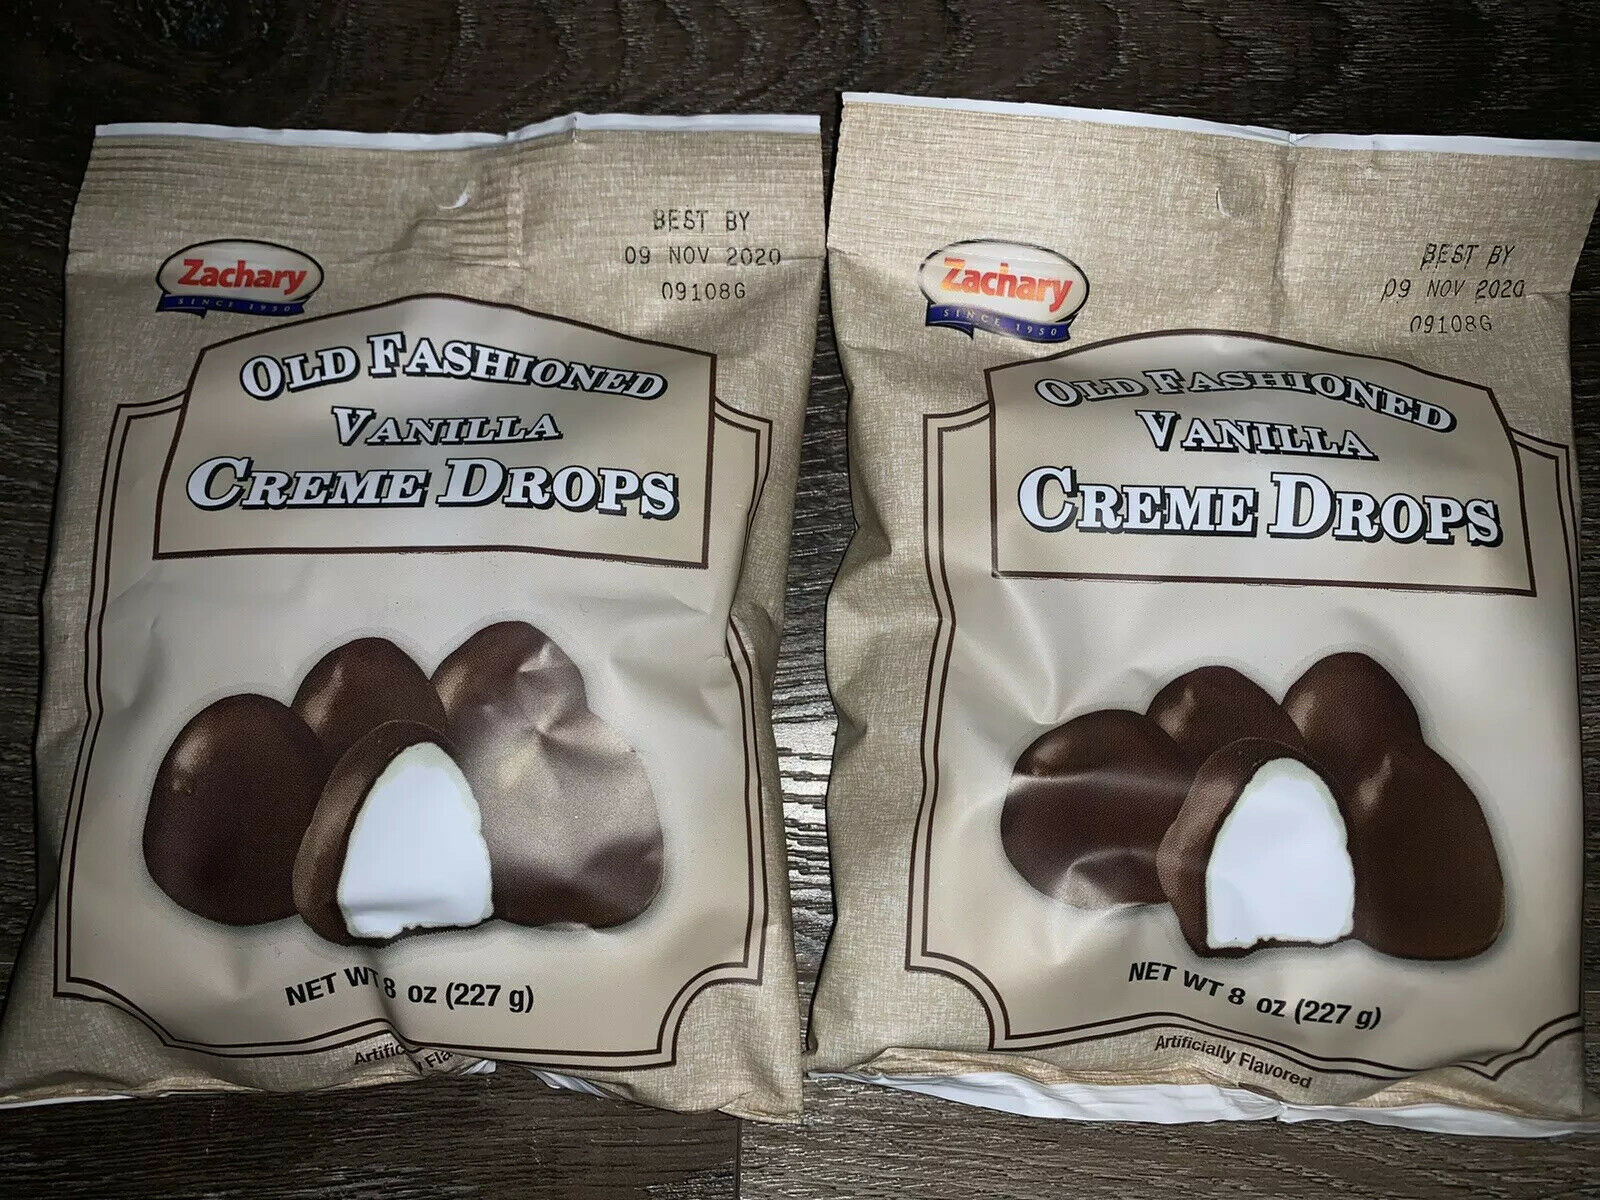 Zachary ~ Old Fashioned Vanilla Creme Drops Chocolate Candy Exp 11 2020 ~ 2 Bags Food And Beverages